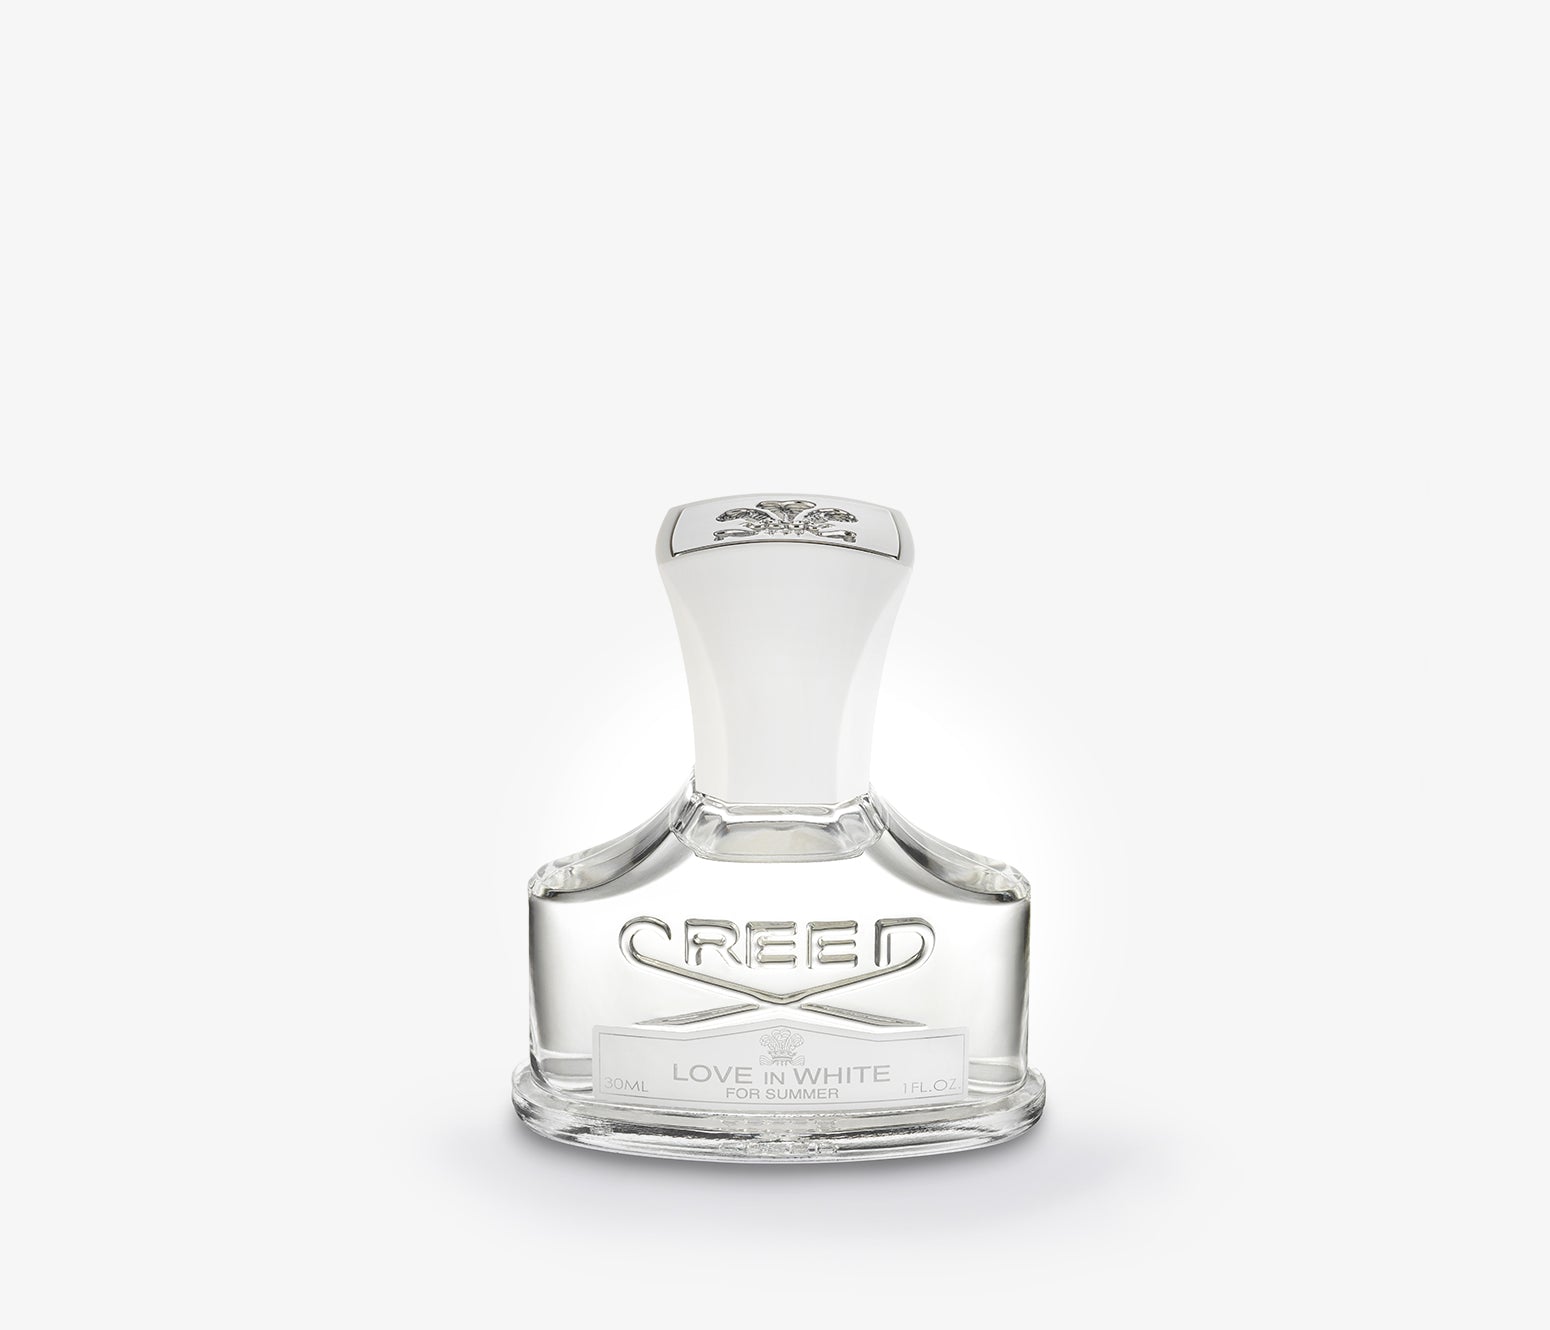 Creed - Love in White for Summer - 75ml - XCU001 - product image - Fragrance - Les Senteurs